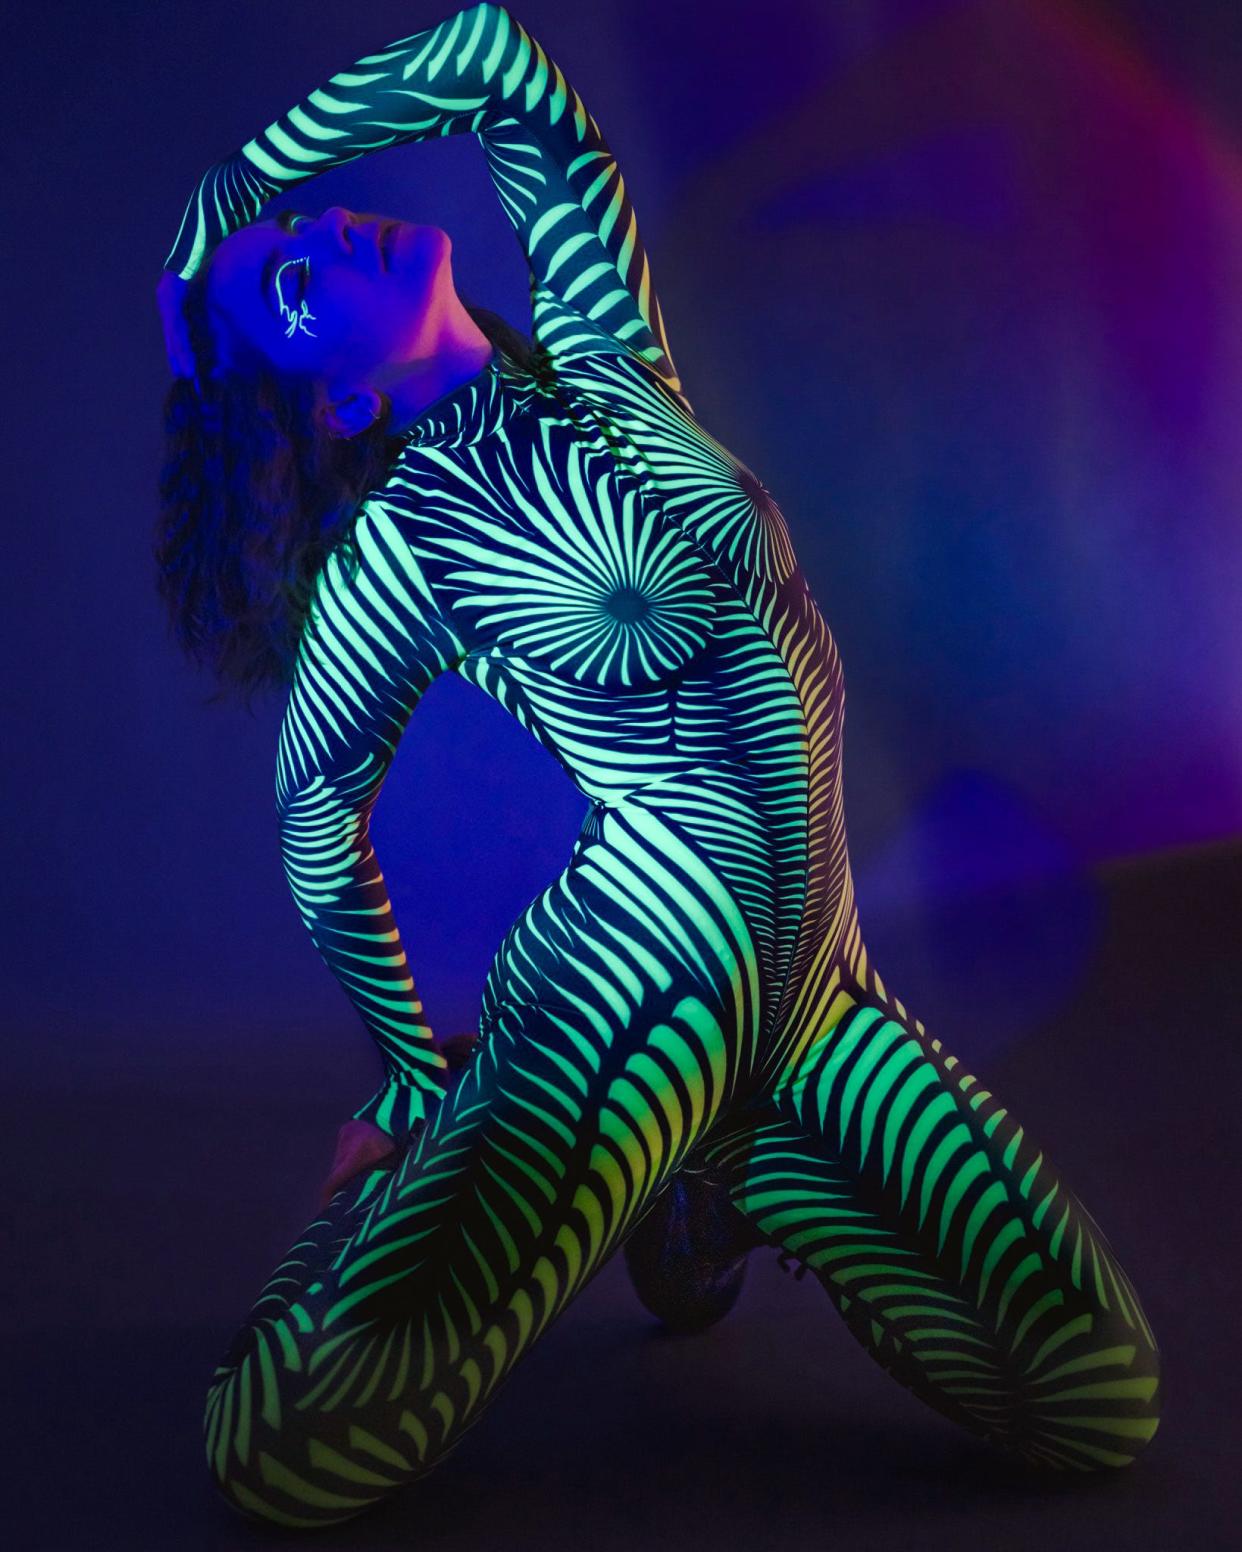 The "Illuminate" art show will be Friday night at The Hub Art Factory in downtown Canton, featuring models in body paint with glow-in-the-dark effects.